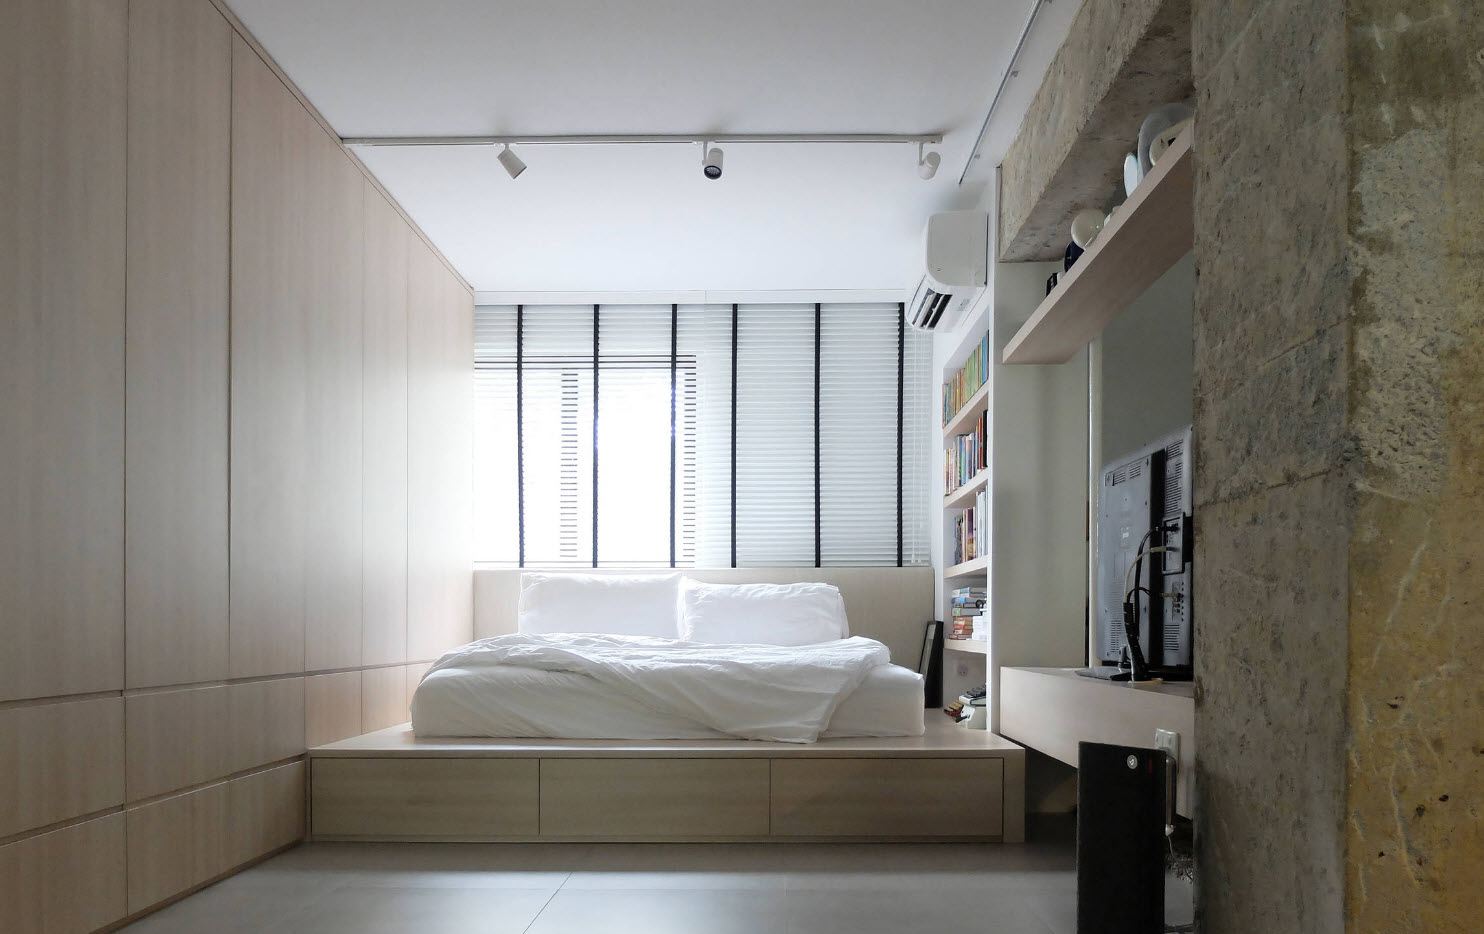 Podium bed at the modern minimalistic bedroom with monolith of the furniture